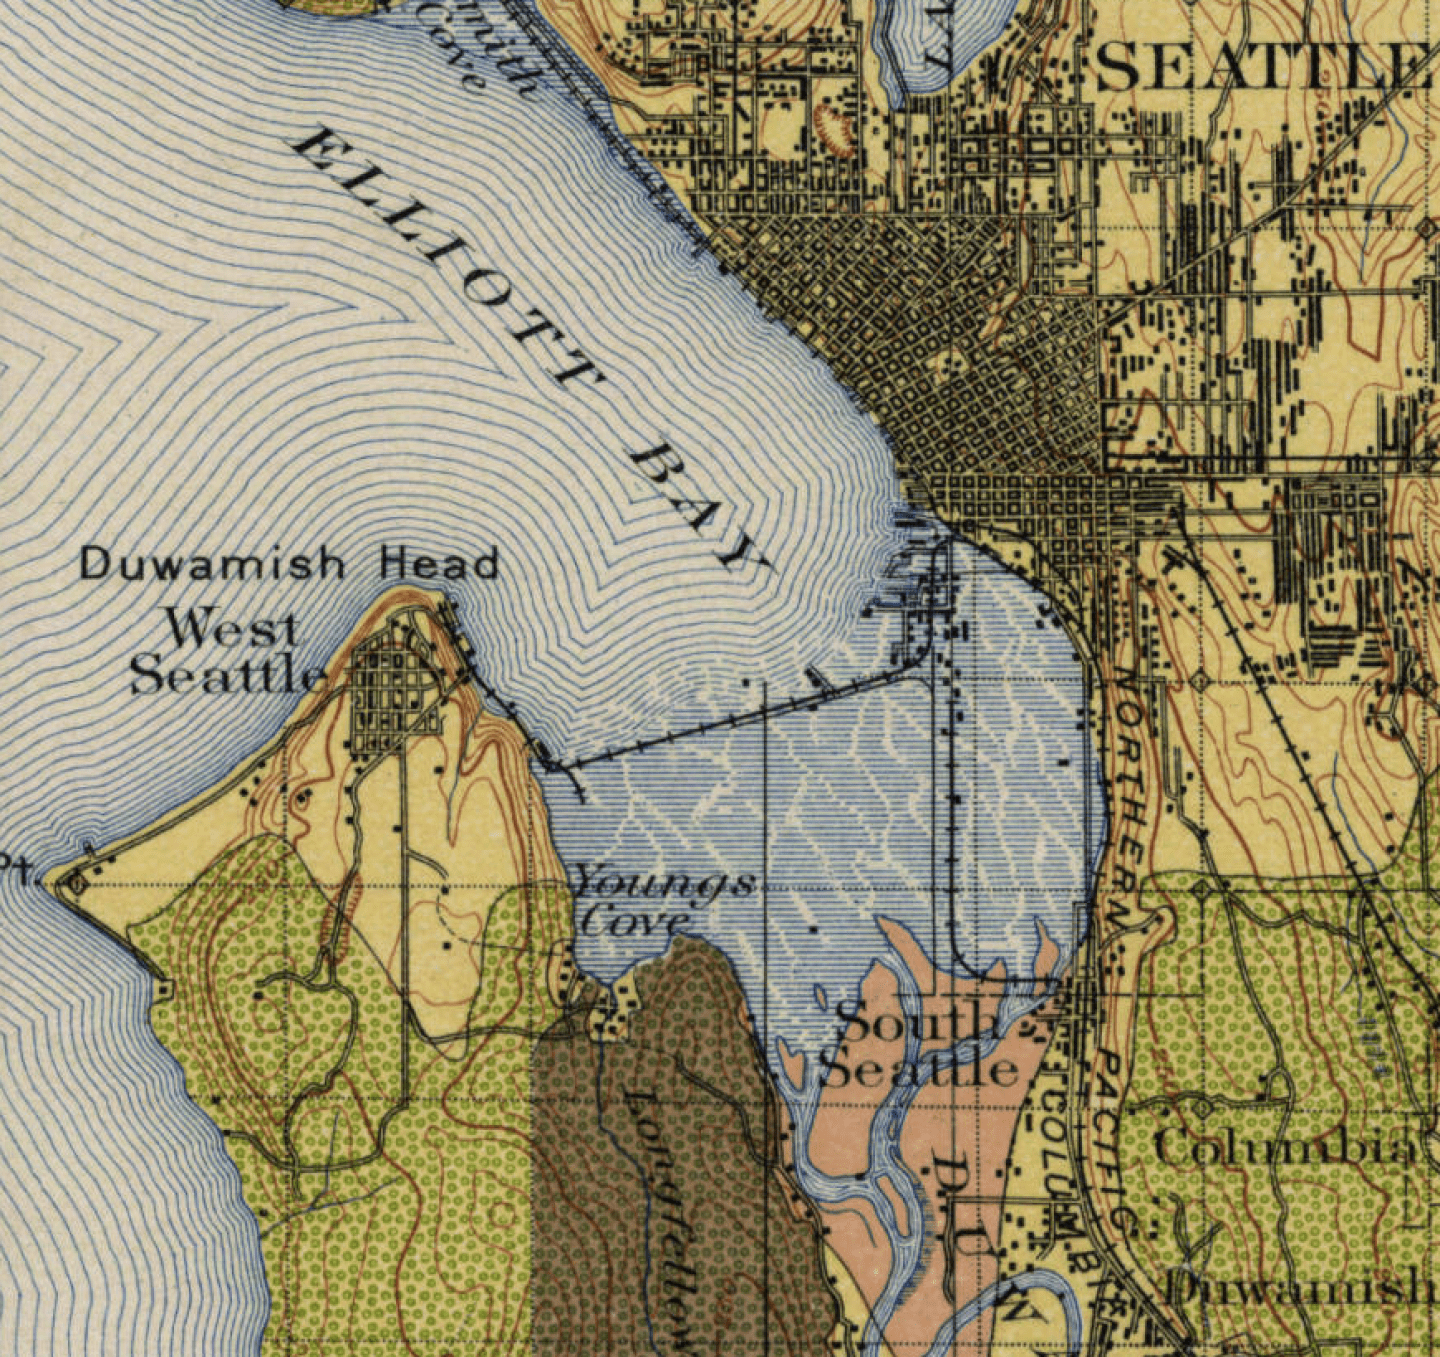 A map of the Seattle shoreline from 1897 per USGS